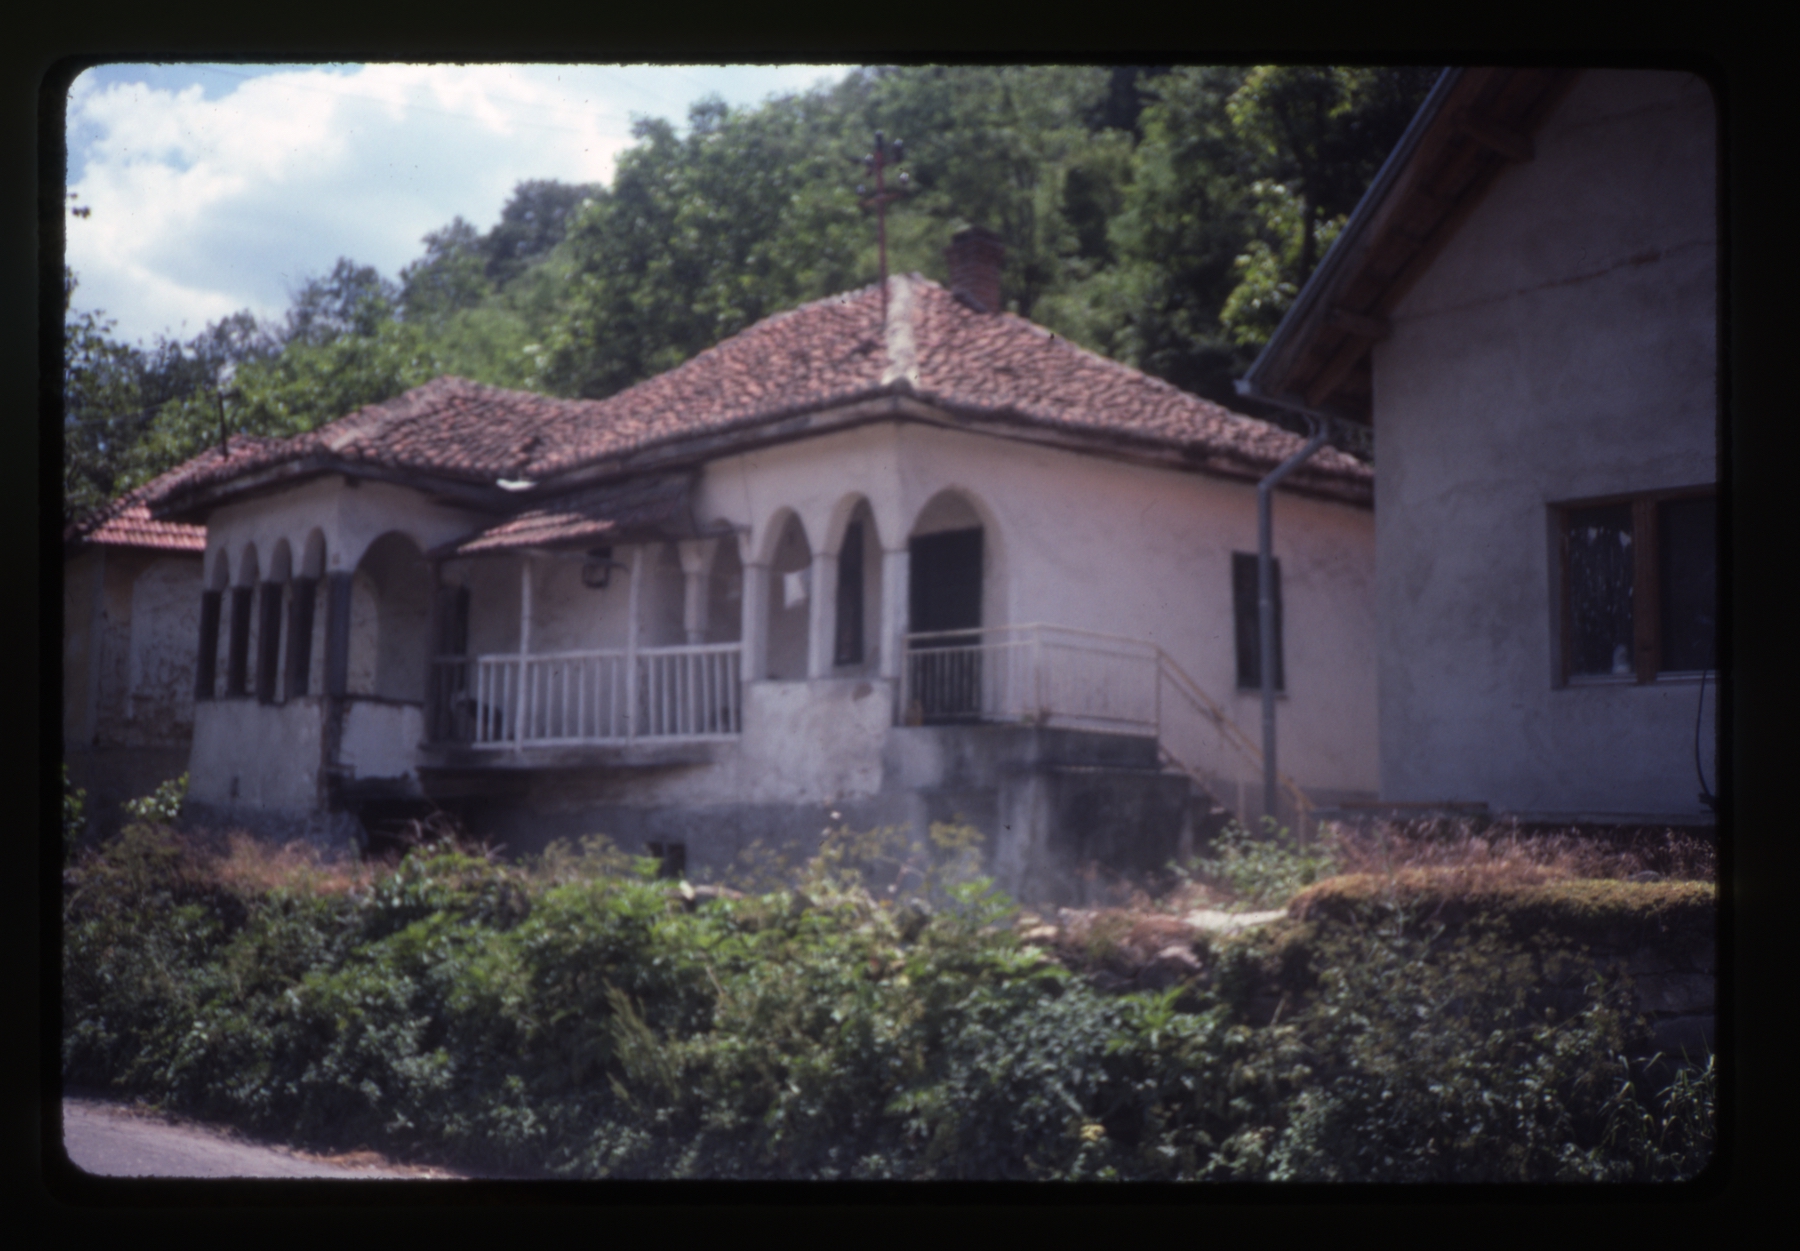 <p>This dwelling (kuća) has numerous renovations and modifications. The traditional arched entry porch, separate elevated porch (čardak) and roman style clay tile roof have survived the changes. The exterior renovations have created a more substantial stair and metal railing leading to the entry and a diagonal bridge connection from the entry porch to the čardak on the left.</p>